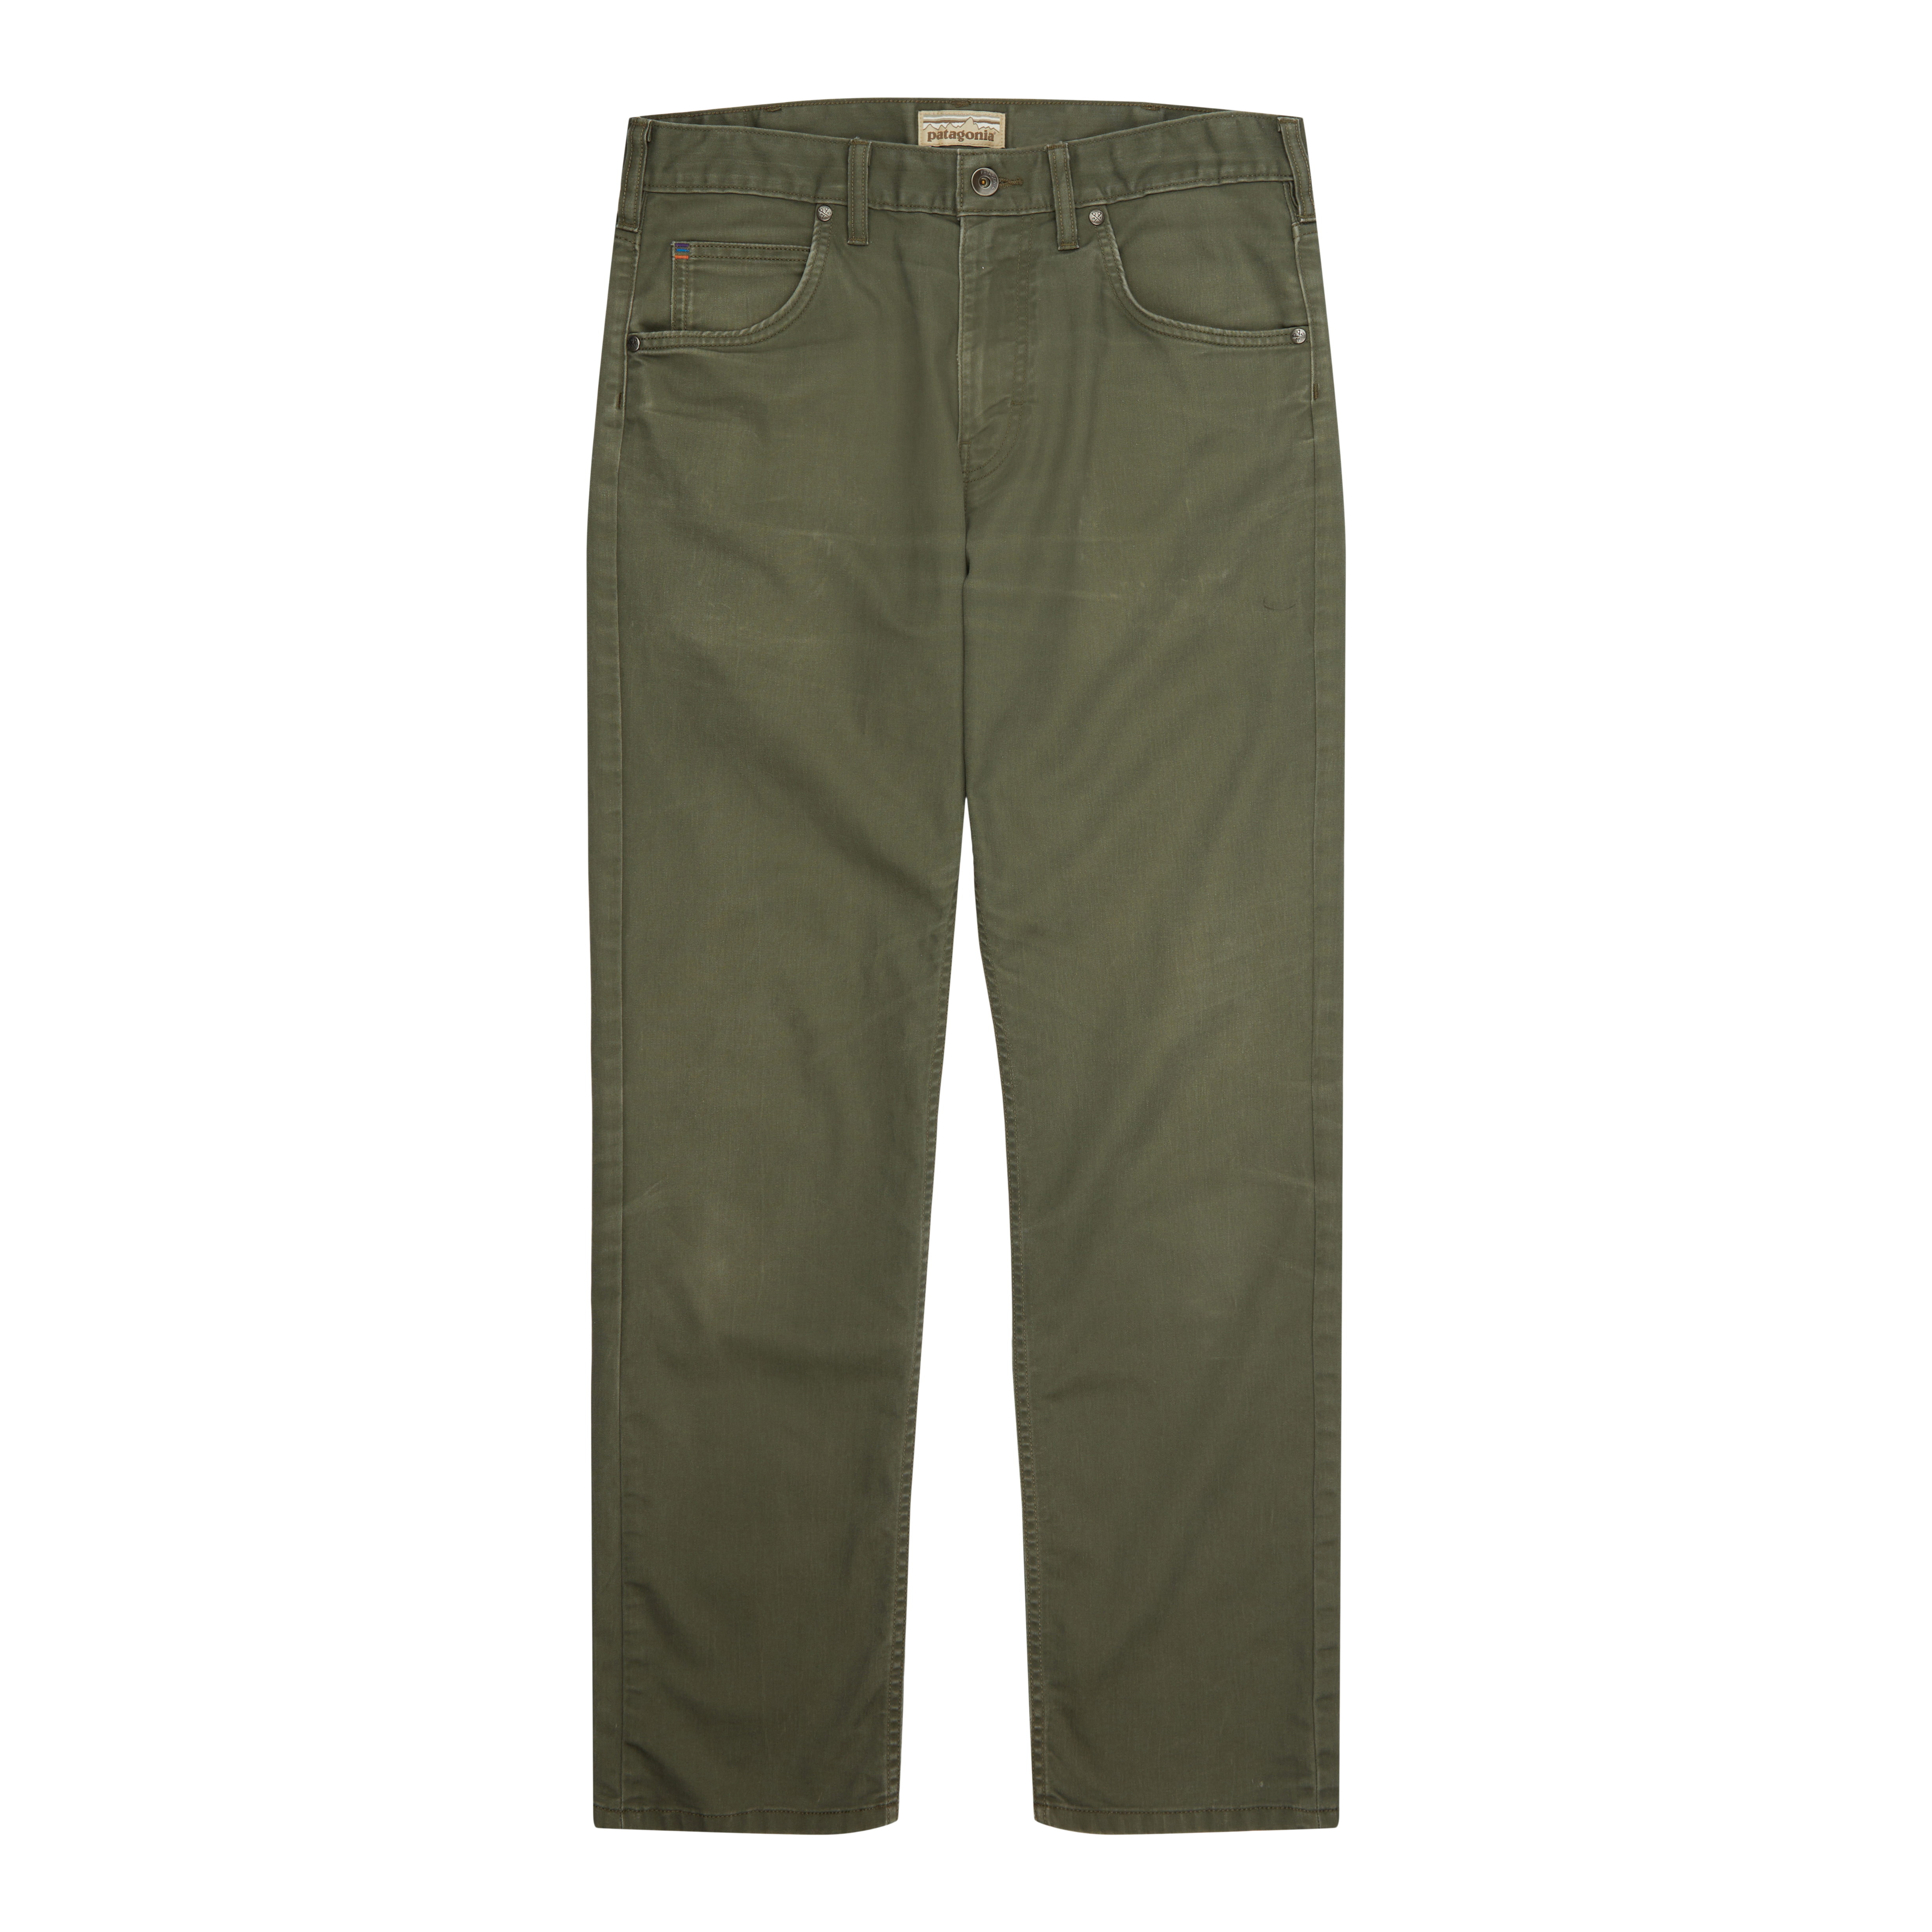 Patagonia Worn Wear Men's Performance Twill Jeans - Short Forge